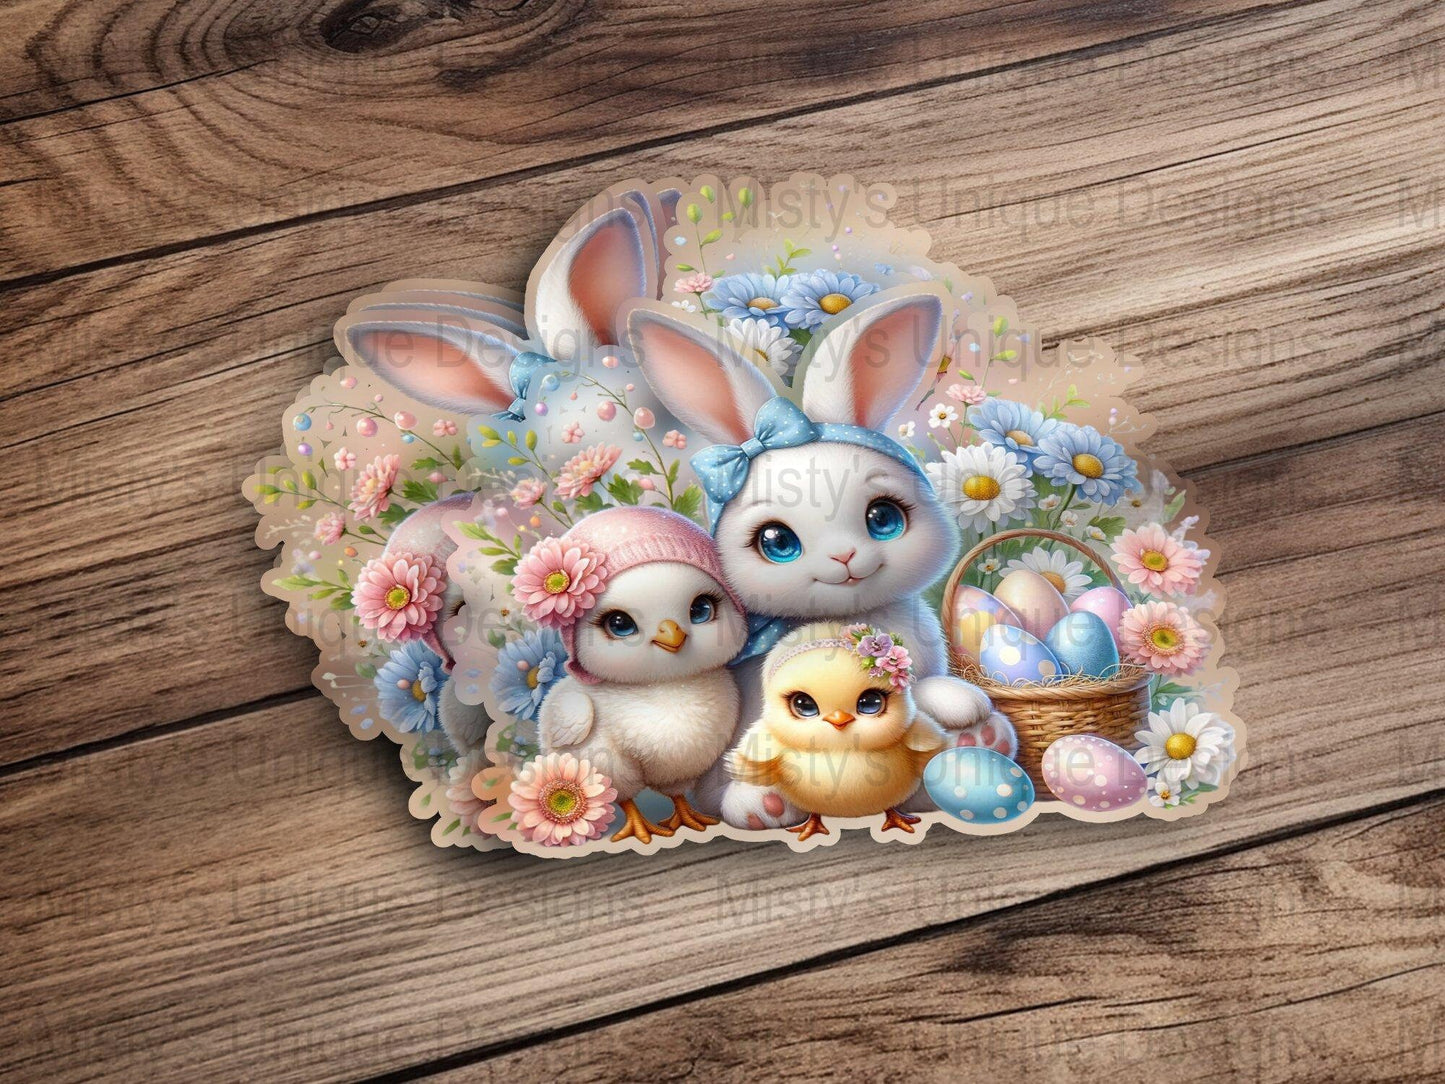 Easter Bunny and Chicks Clipart, Spring Digital Download, PNG Cute Rabbits with Basket, Pastel Easter Eggs Illustration, Floral Decor